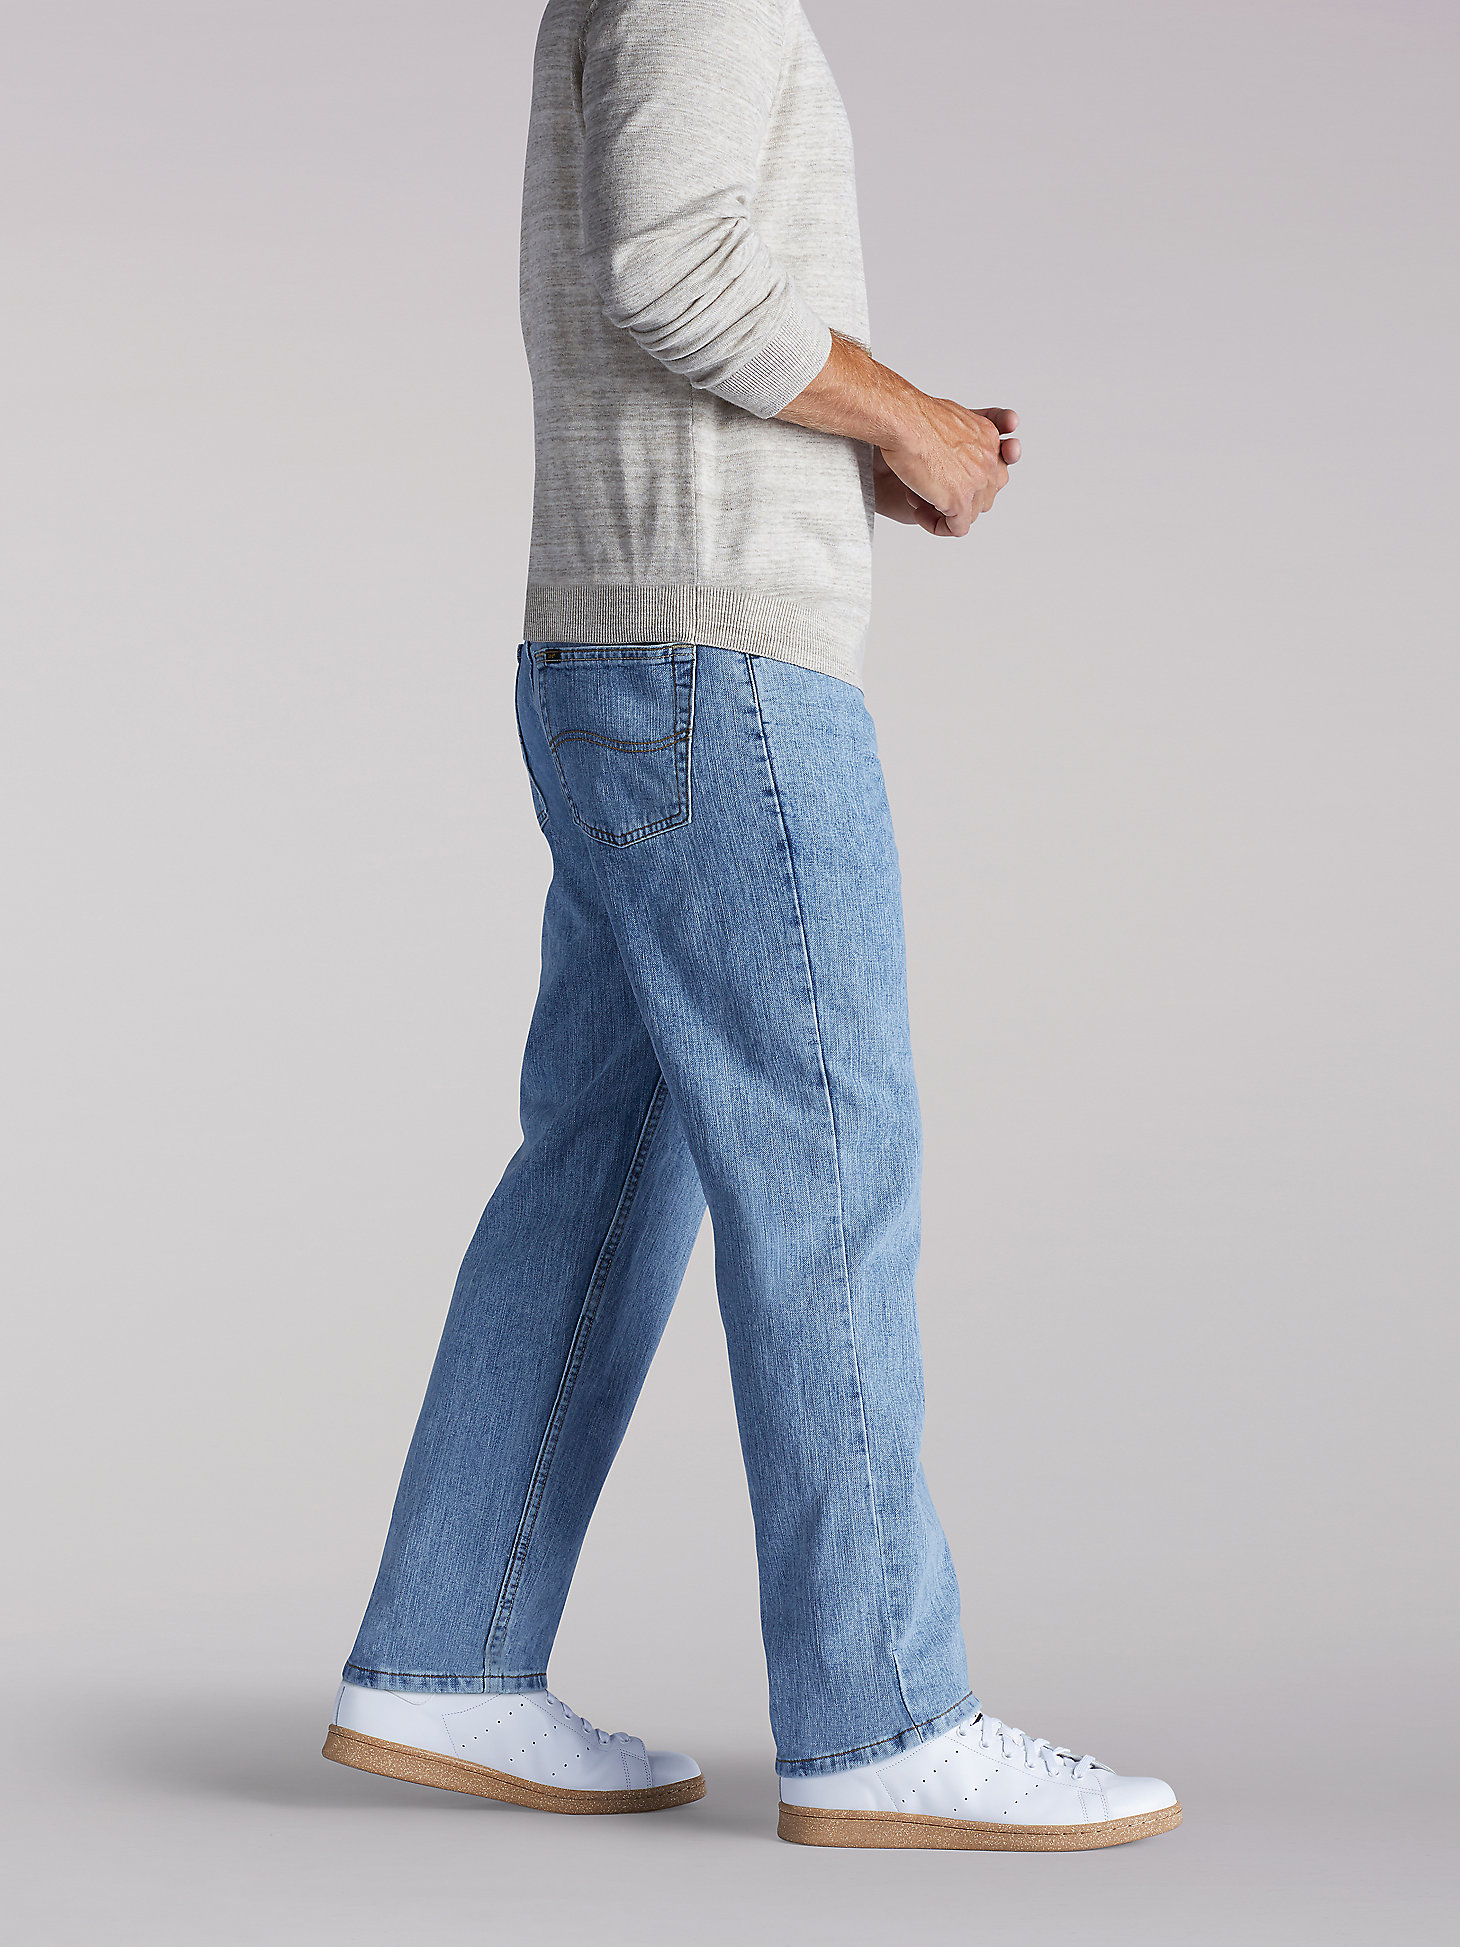 Men’s Relaxed Fit Straight Leg Jeans in Worn Light alternative view 2